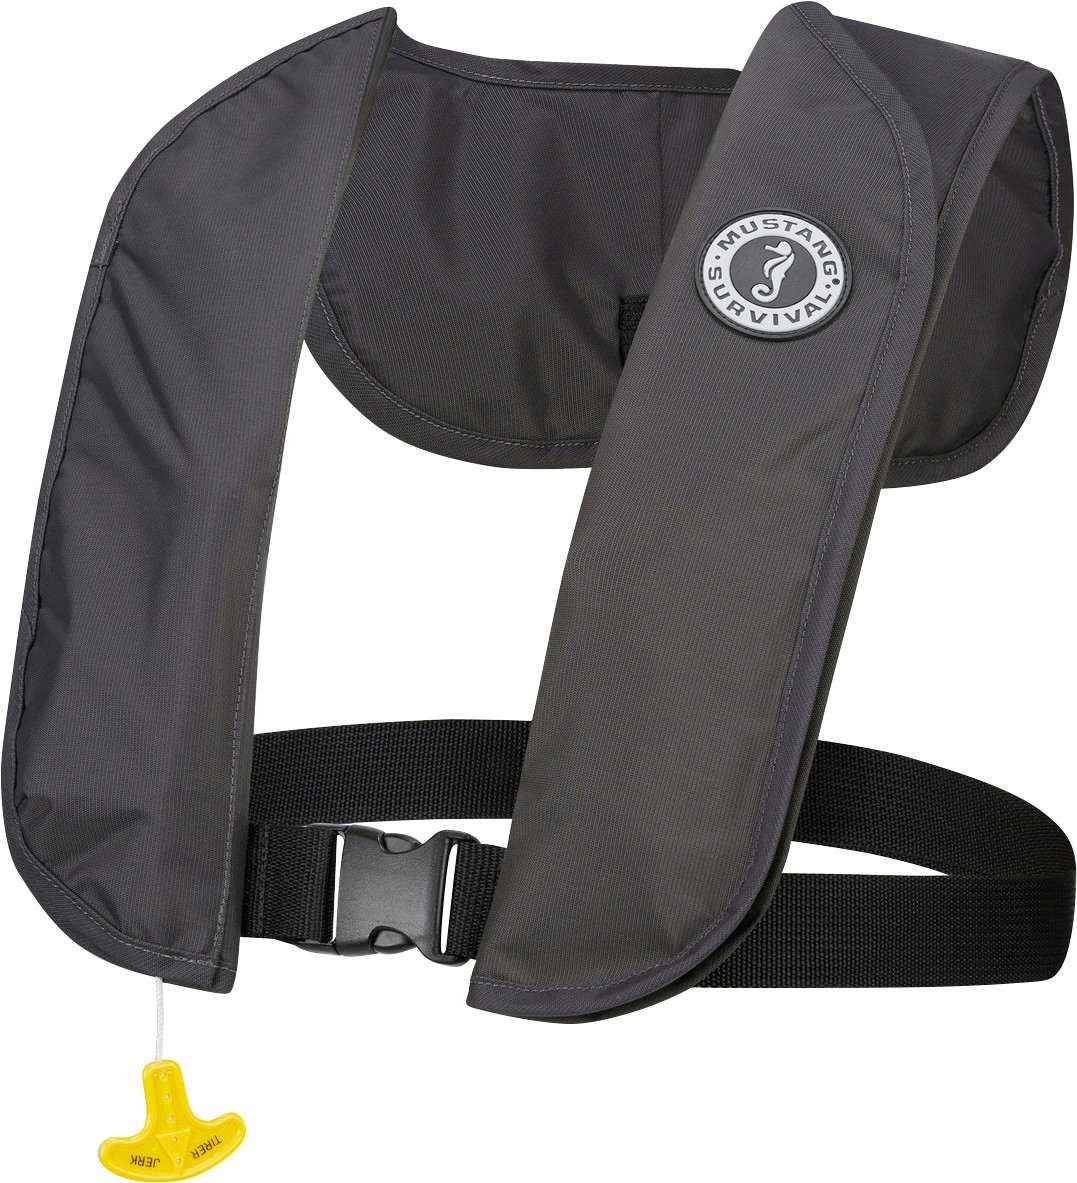 MIT 70 Inflatable PFD - Manual Admiral Gray